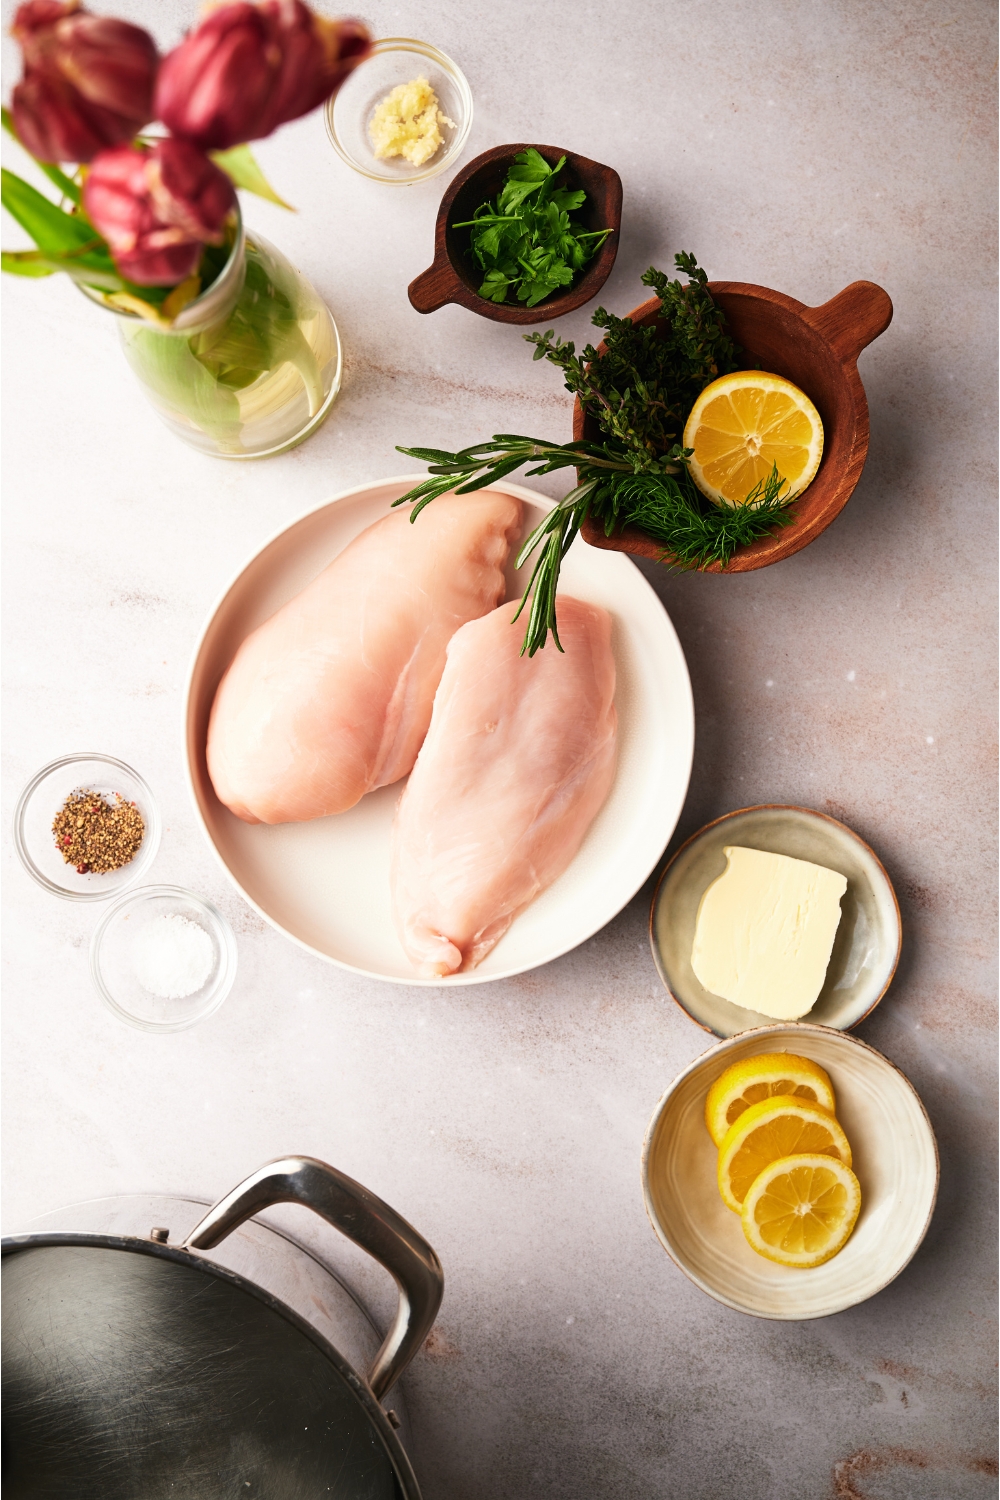 An assortment of ingredients including a plate of raw chicken and bowls of salt, pepper, butter, lemon slices, and fresh herbs.